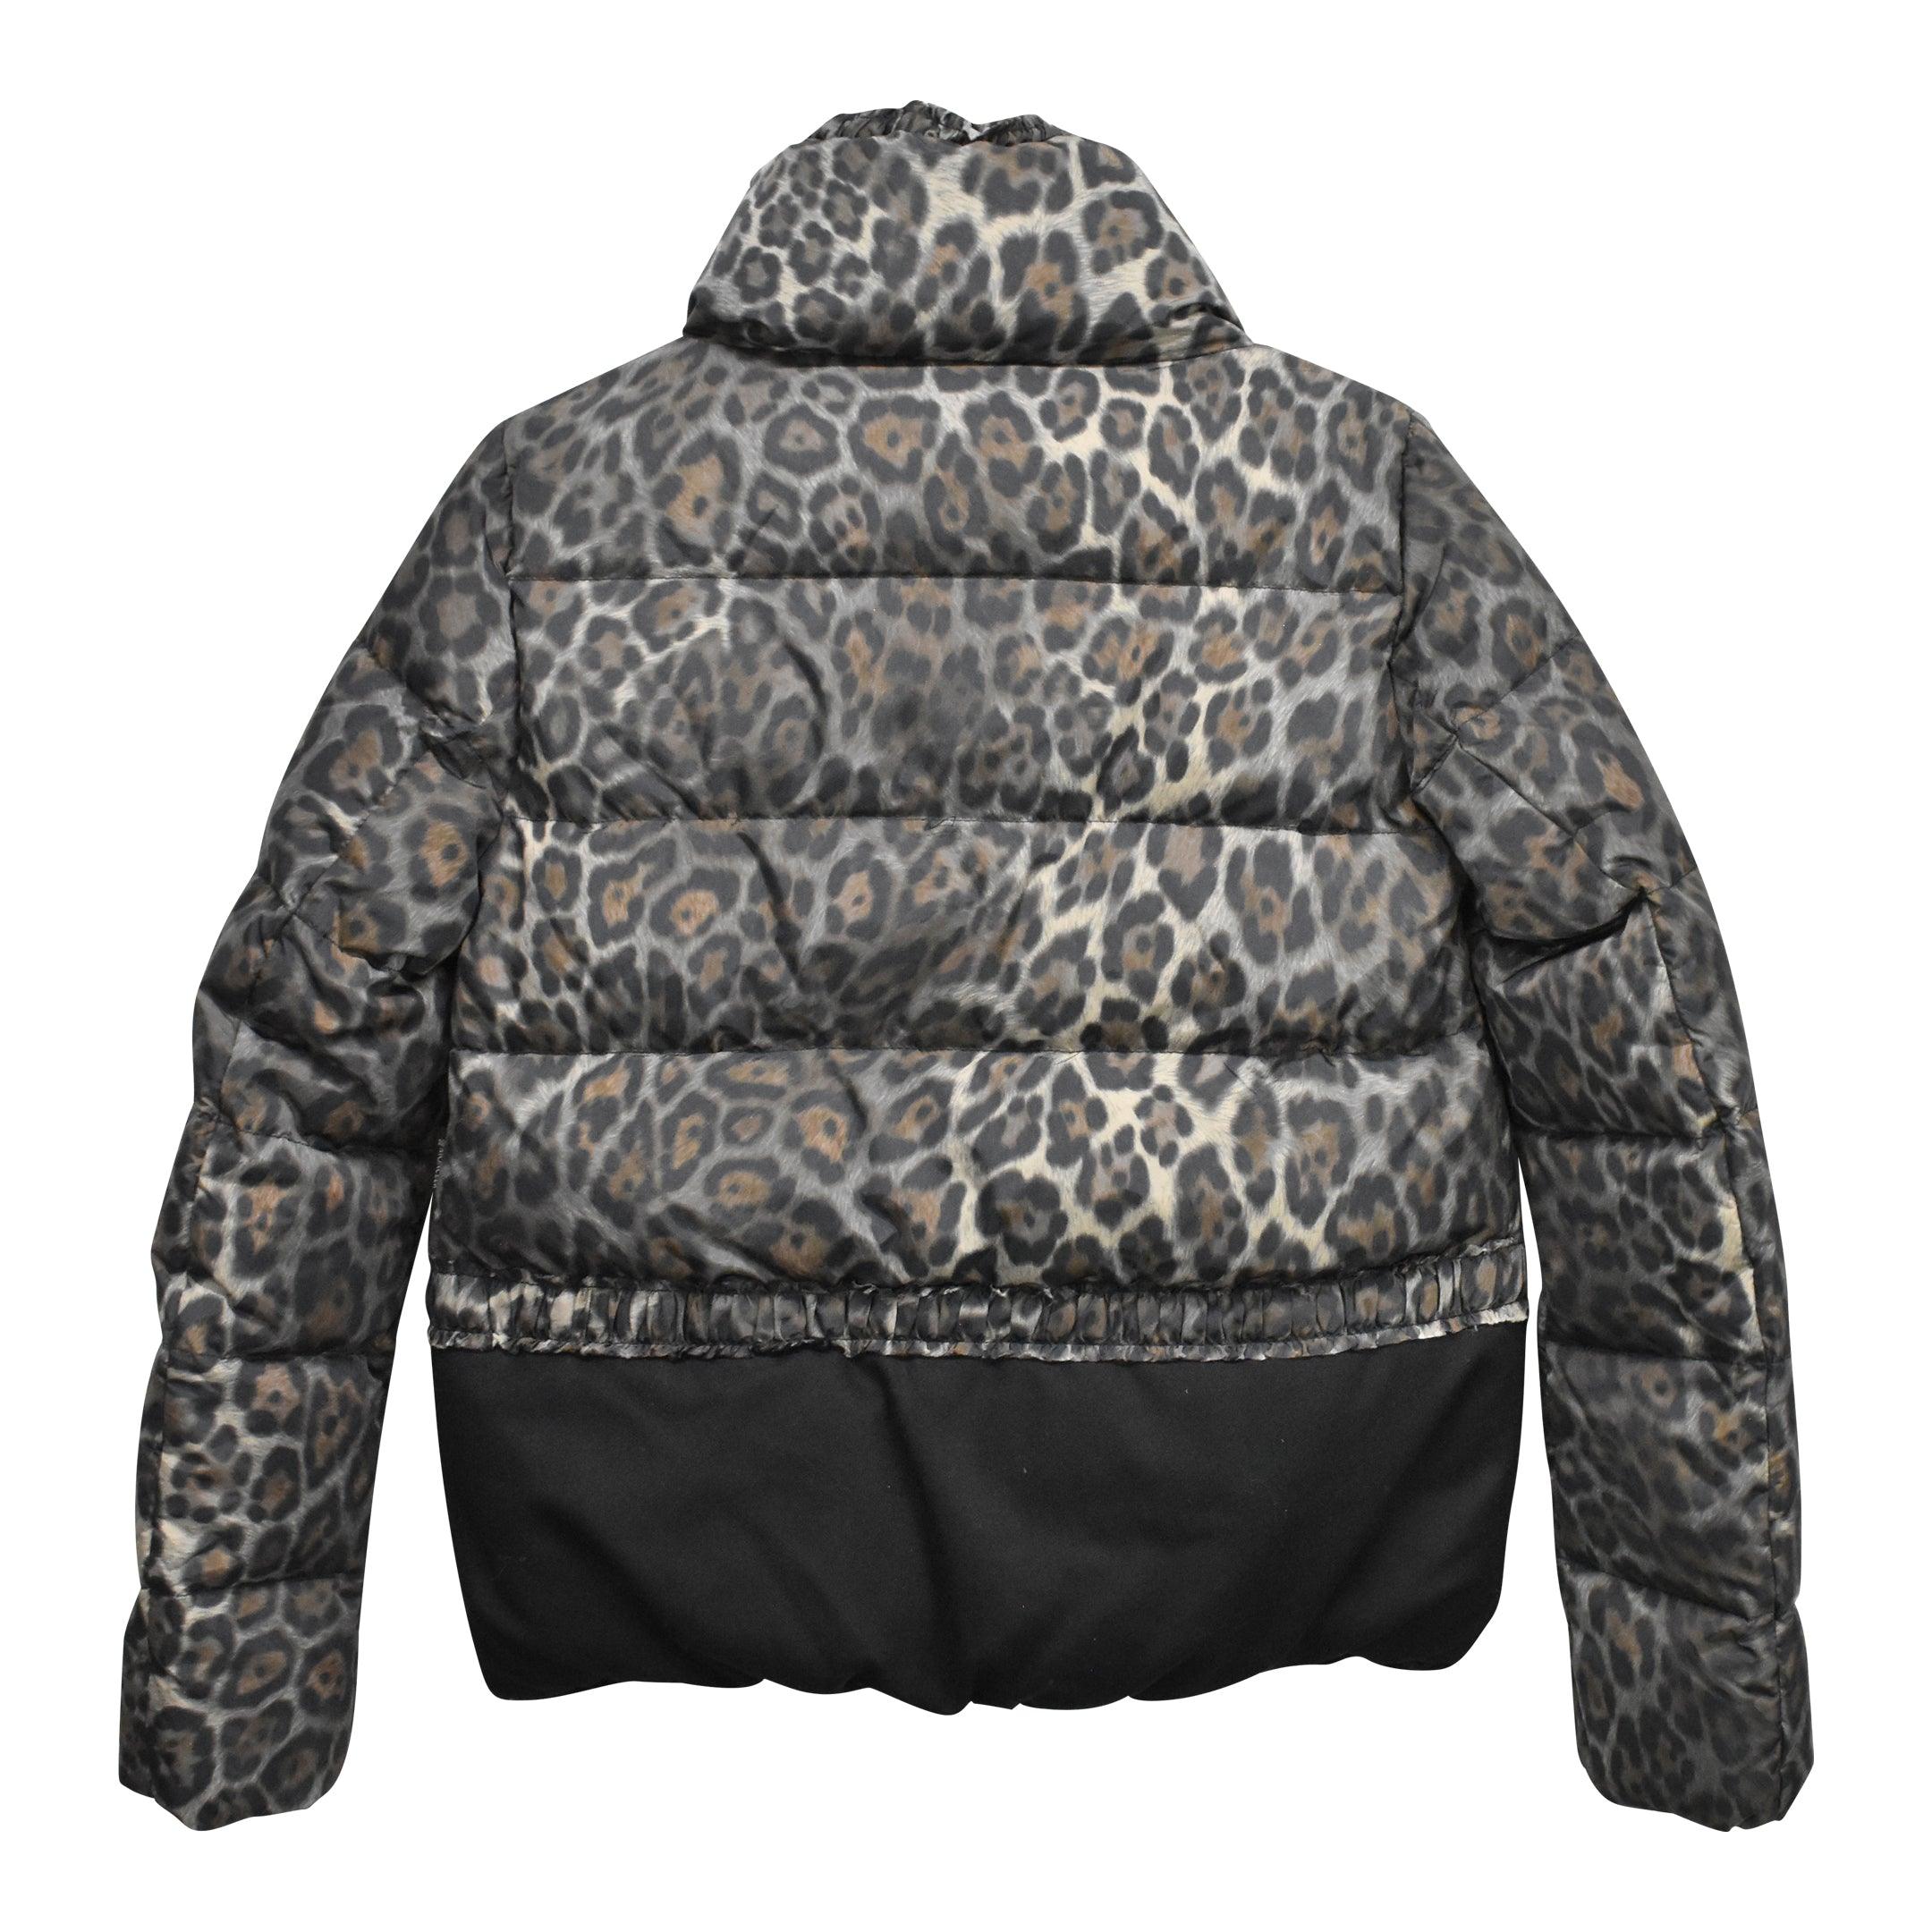 Moncler 'Argentee' Jacket - Women's 0 - Fashionably Yours